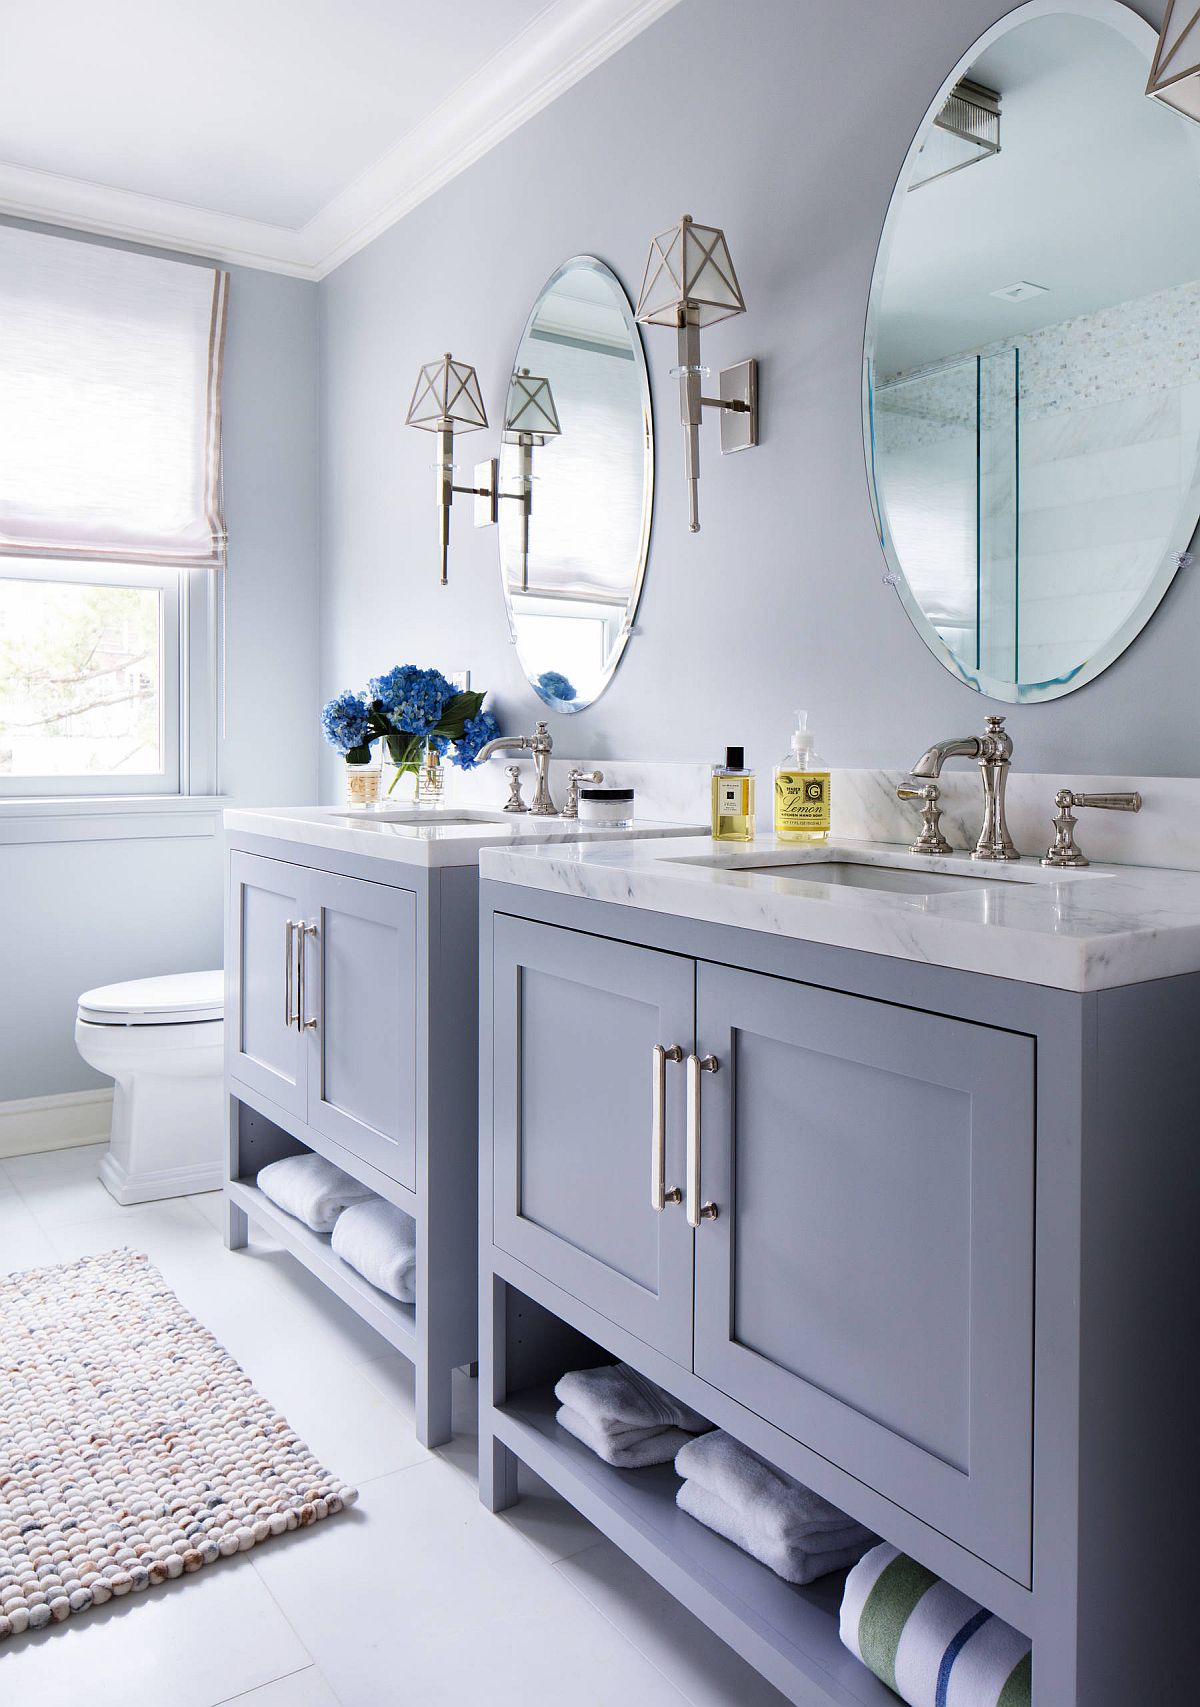 Bluish-gray-for-the-bathroom-vanities-and-walls-makes-for-a-lovely-tiny-bathroom-with-modern-beach-style